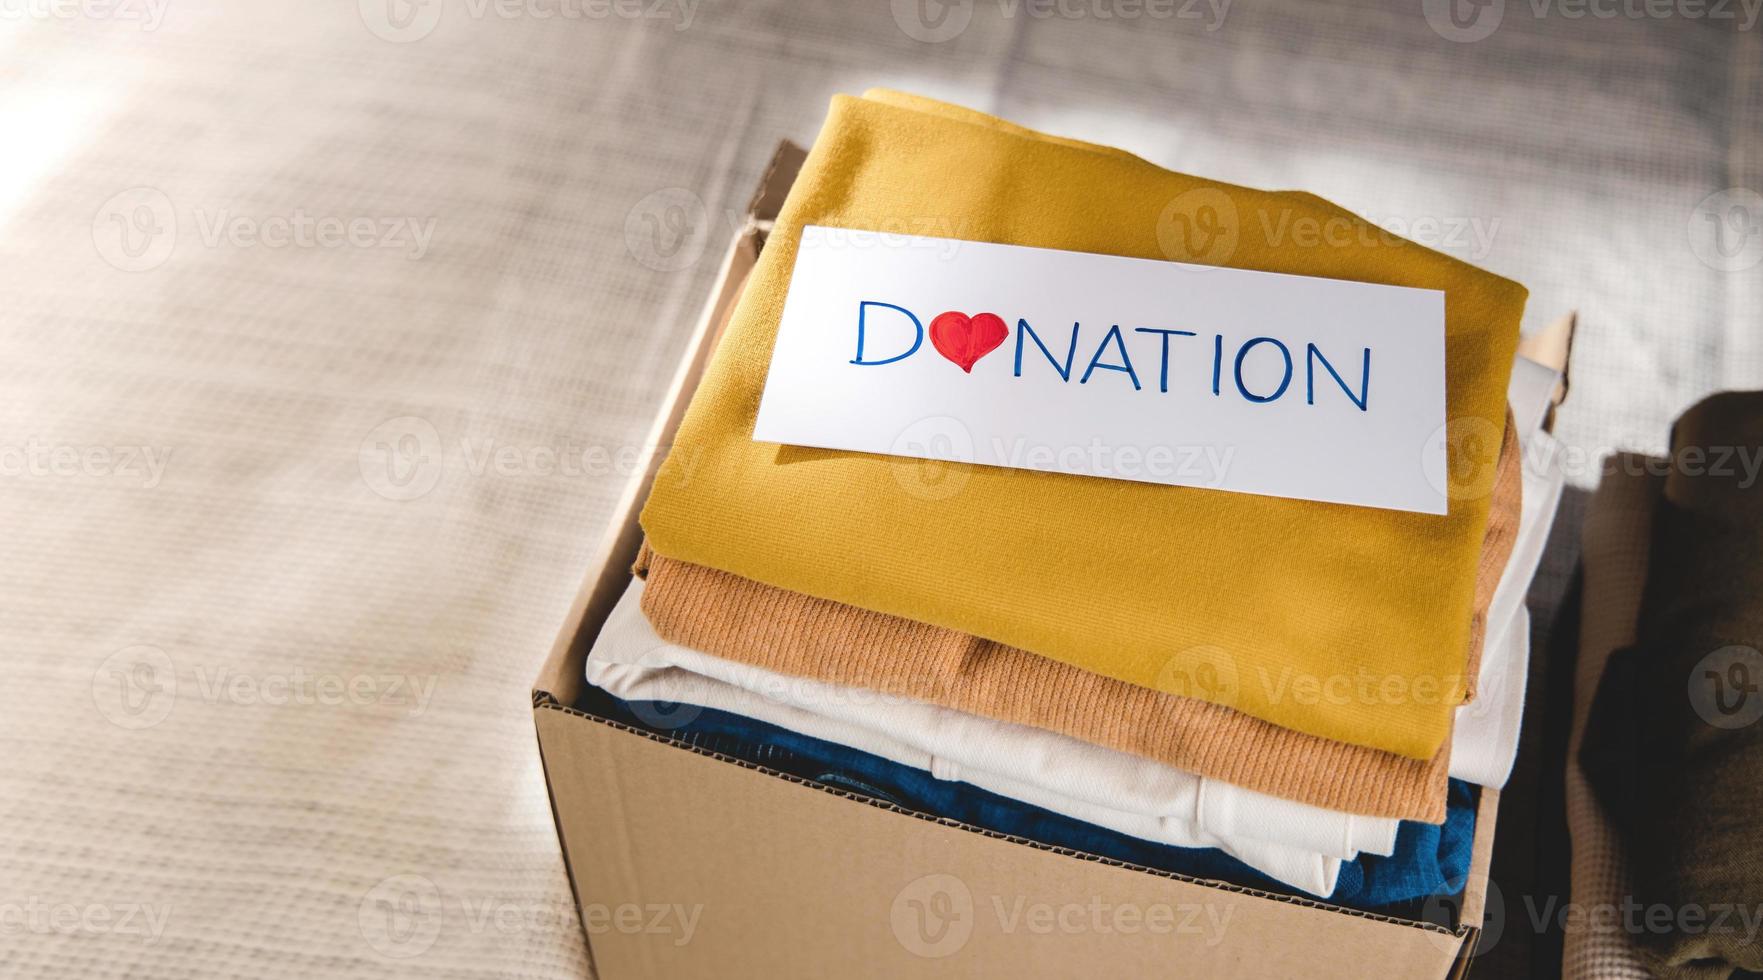 Clothes Donation Concept. Box of Cloth with Donate label. Preparing Used Old Garment at Home. Top View photo